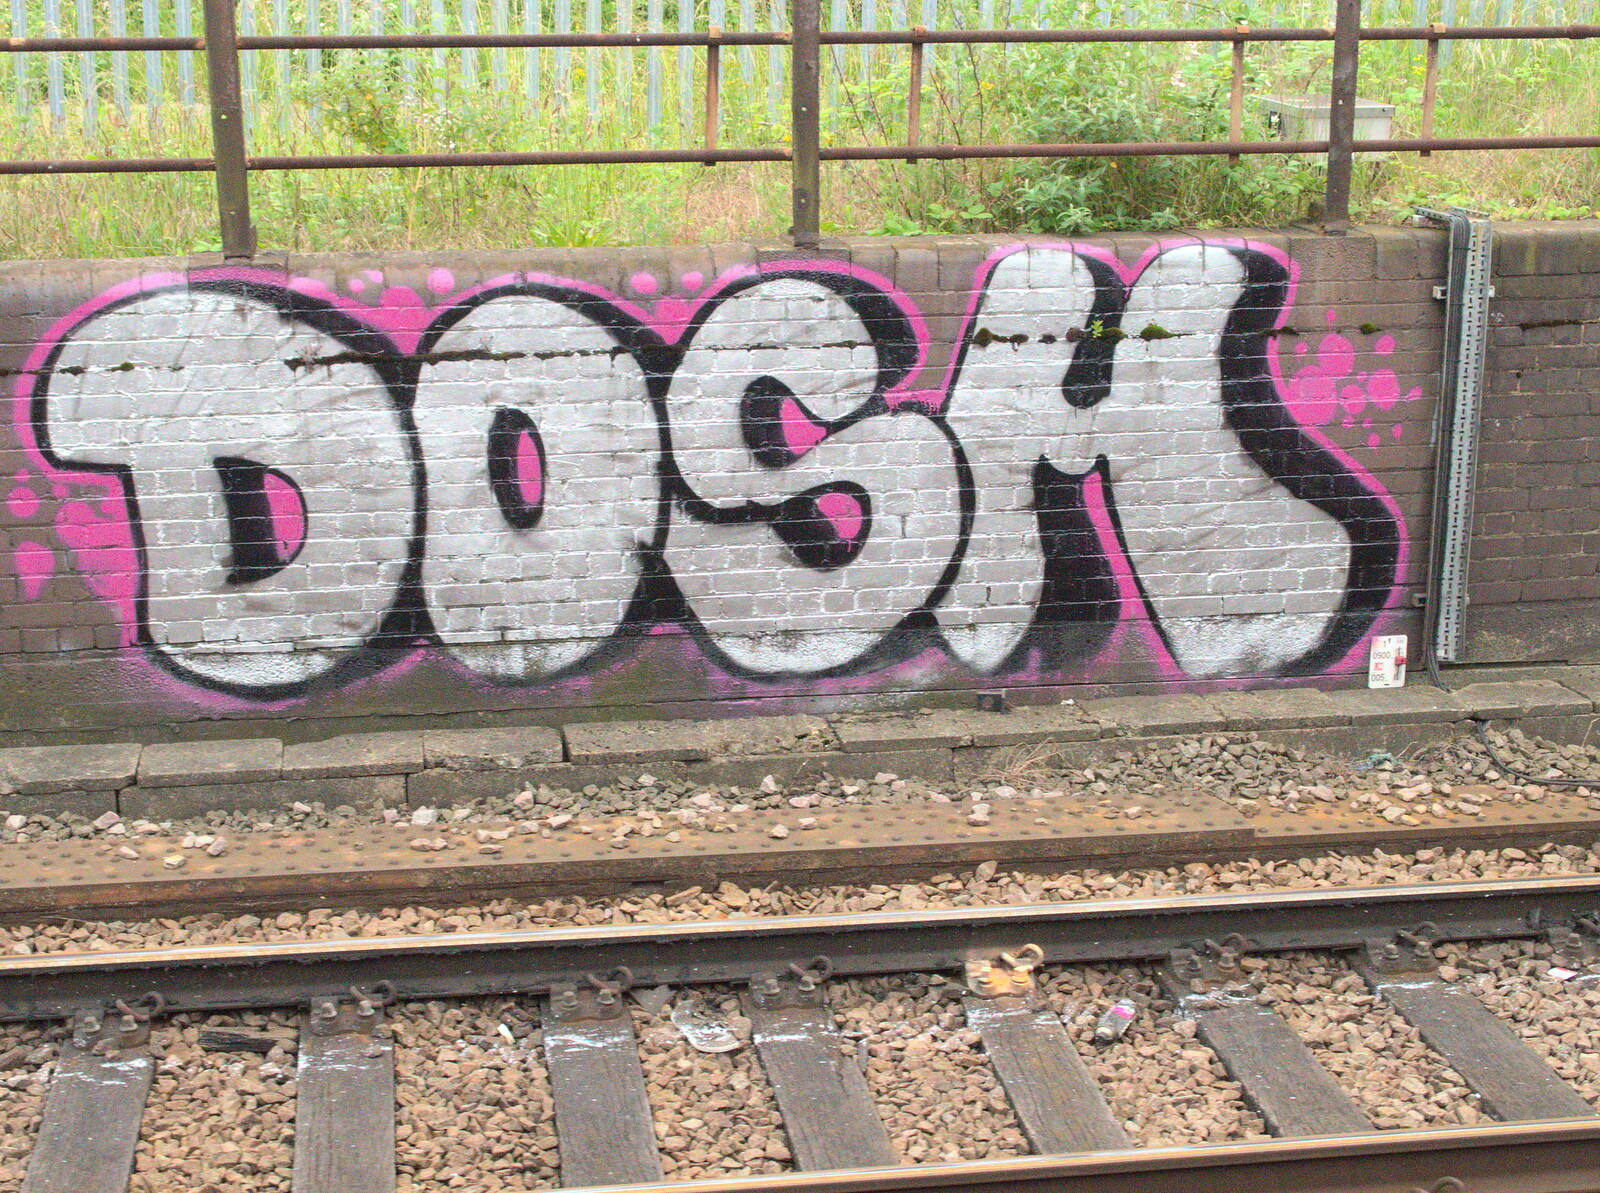 A big 'Dosh' graffiti tag from A Trip to Norwich and Diss Markets, Norfolk - 25th June 2016